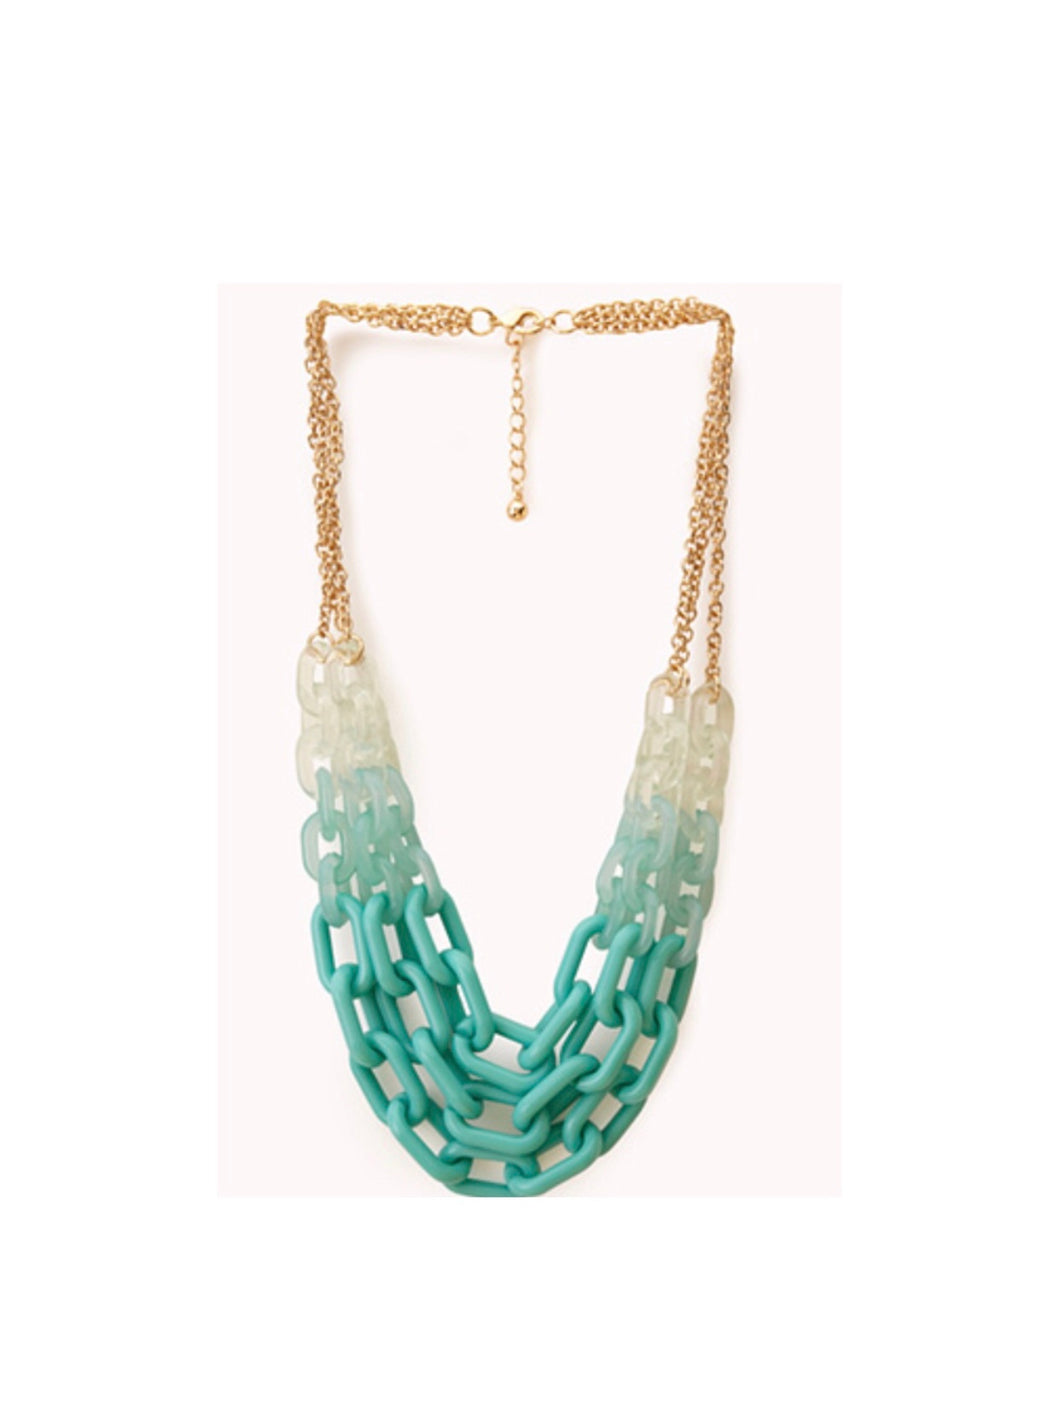 Layered Ombre Necklace